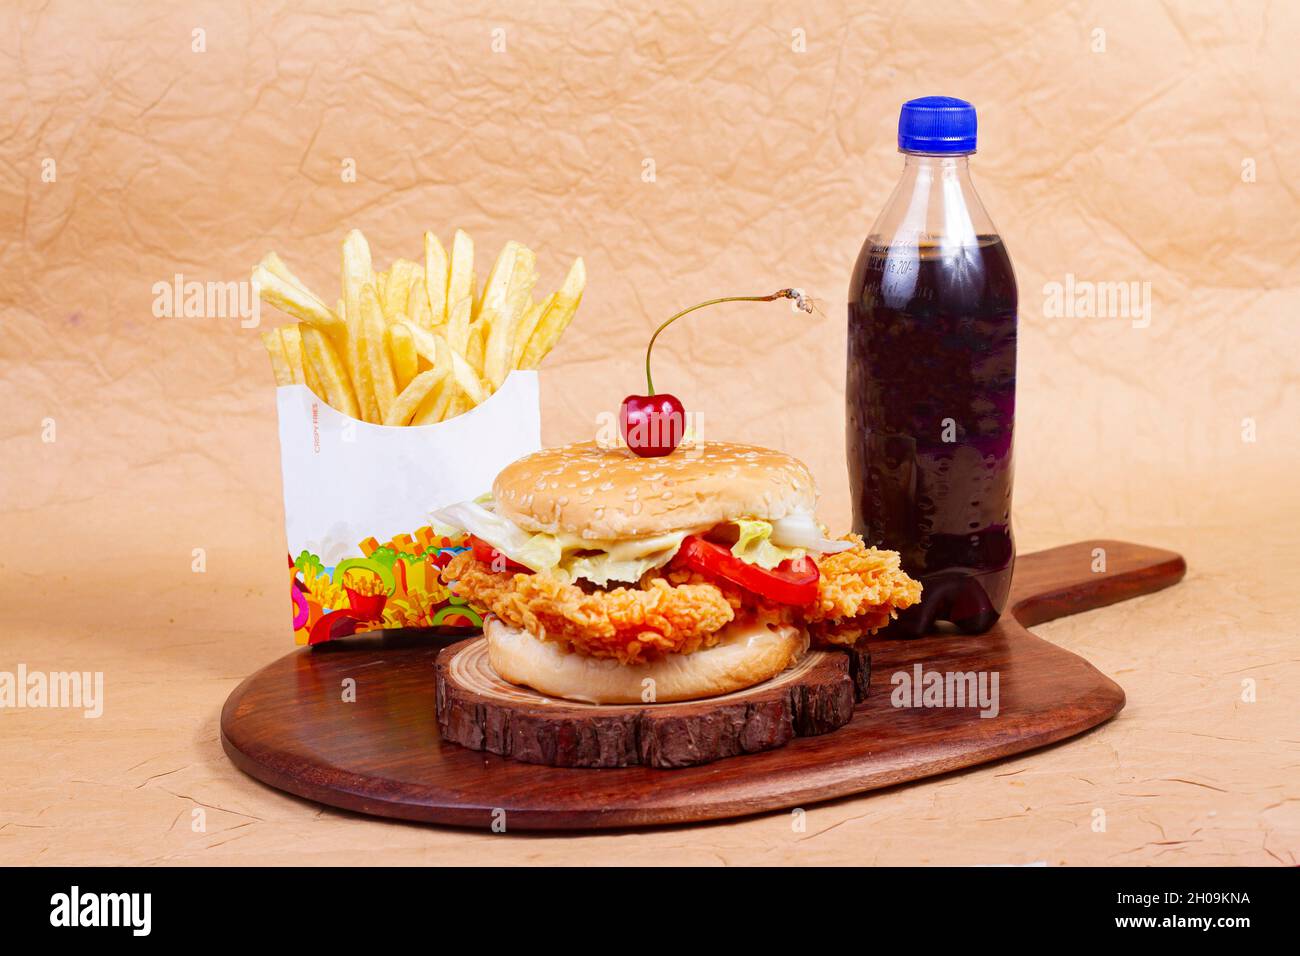 Juicy fish burger, hamburger or cheeseburger with one fish patties, with sauce french fries and cold drink. Concept of American fast food. Copy space Stock Photo